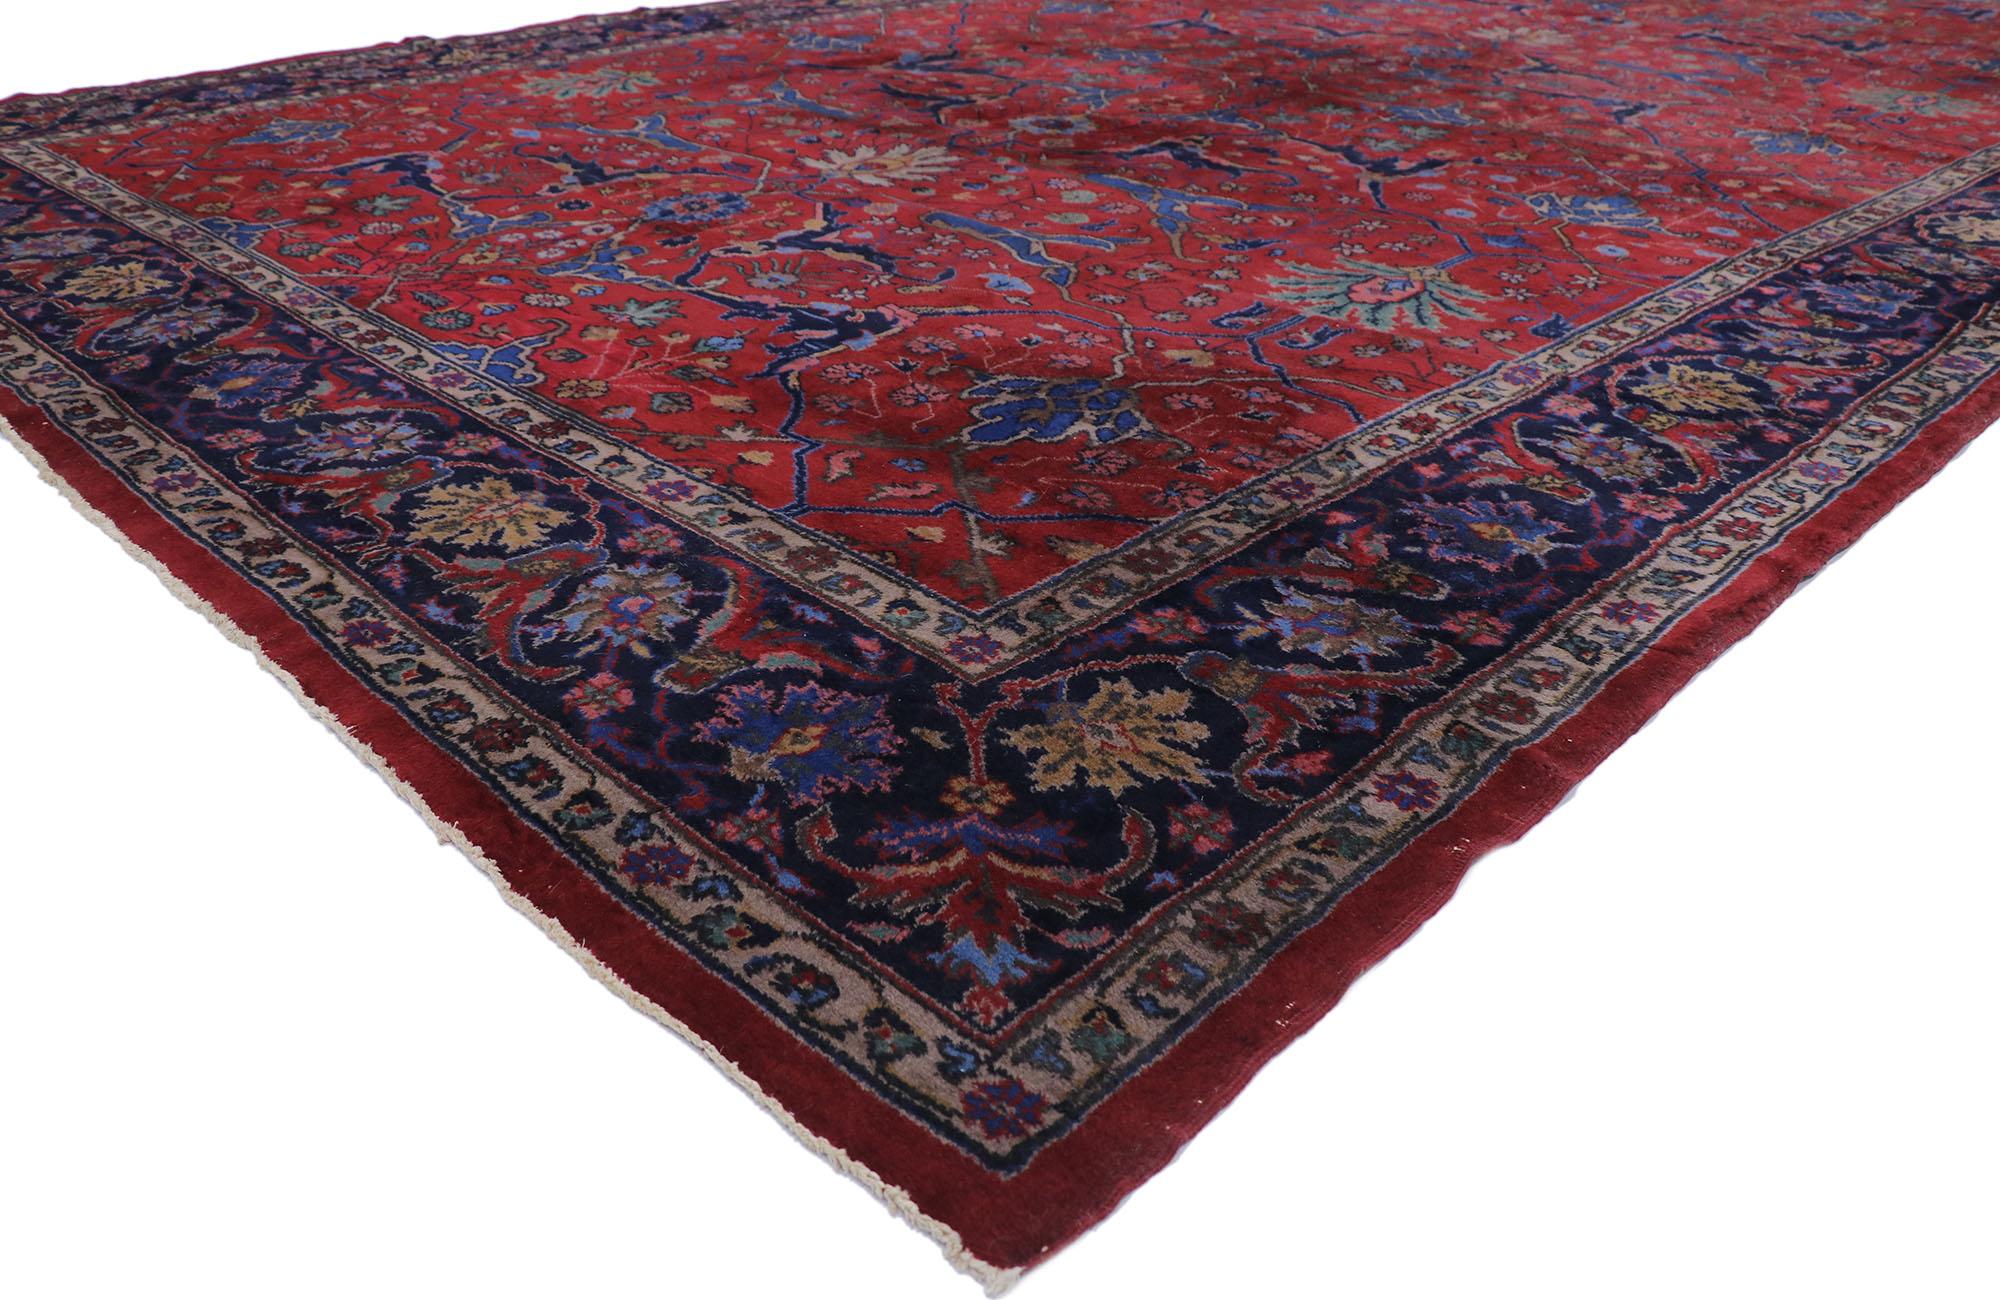 72122 Oversized Antique Turkish Sparta Rug, 10'09 x 19'01. Turkish Sparta rugs, originating from the southwestern town of Sparta in Turkey, are distinguished by their intricate geometric patterns, floral motifs, and medallion designs, all woven with